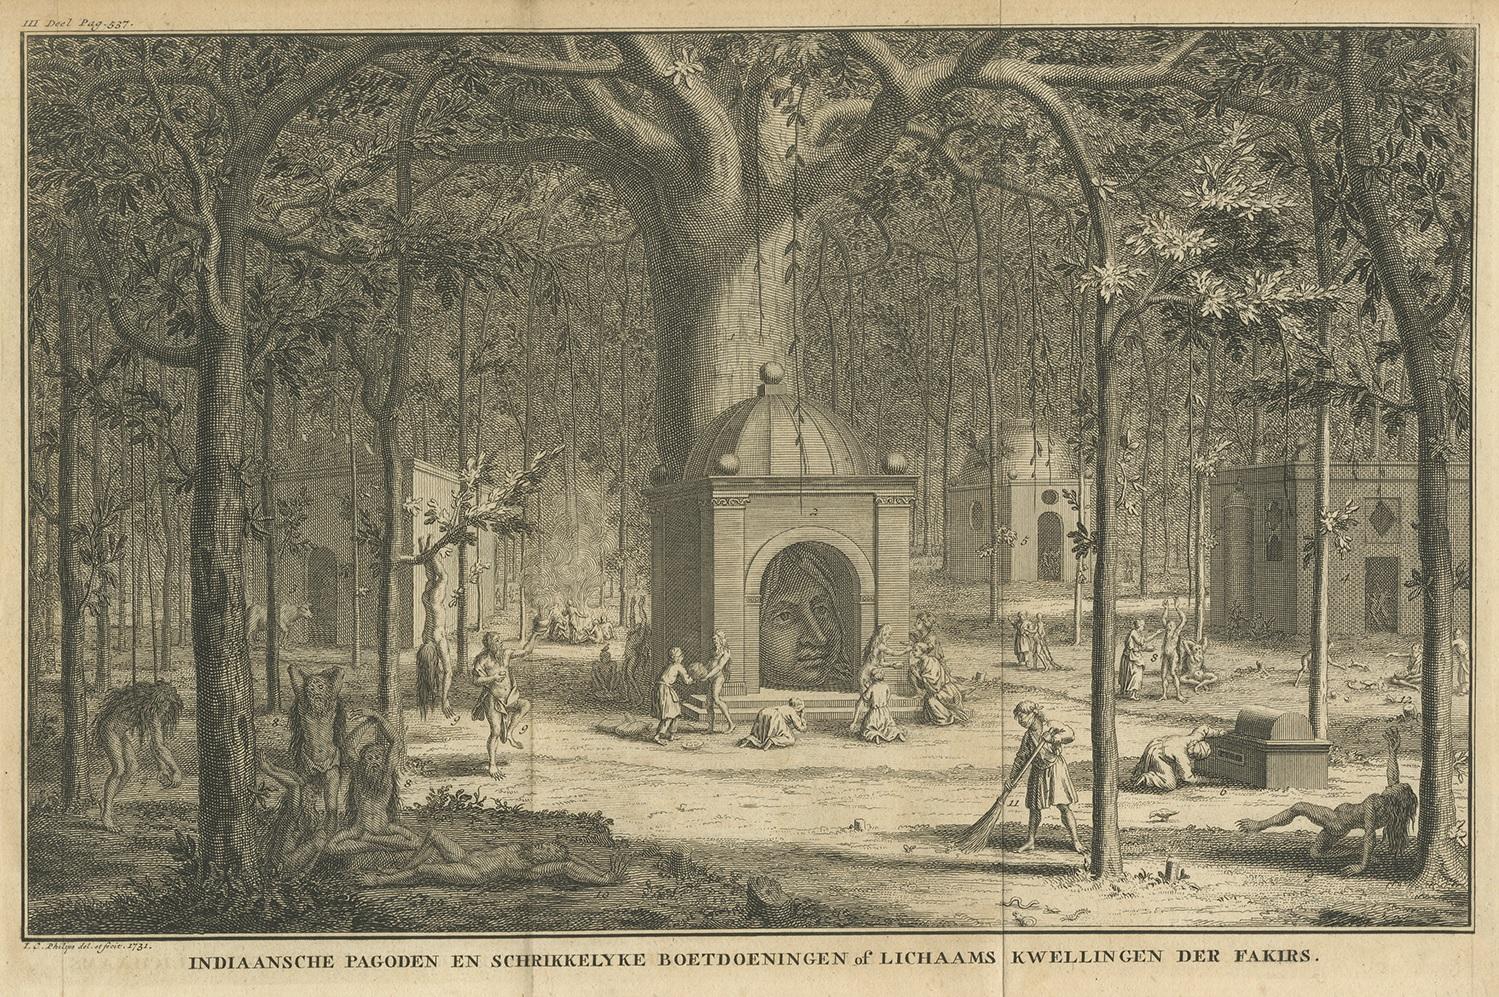 Antique print titled 'Indiaansche Pagoden en schrikkelyke boetdoeningen of lichaams kwellingen der Fakirs.' Depicts Indian Pagodas en terrible penitences or bodily torments of the Fakirs. This plate also shows a Banyan or Indian fig tree. This print